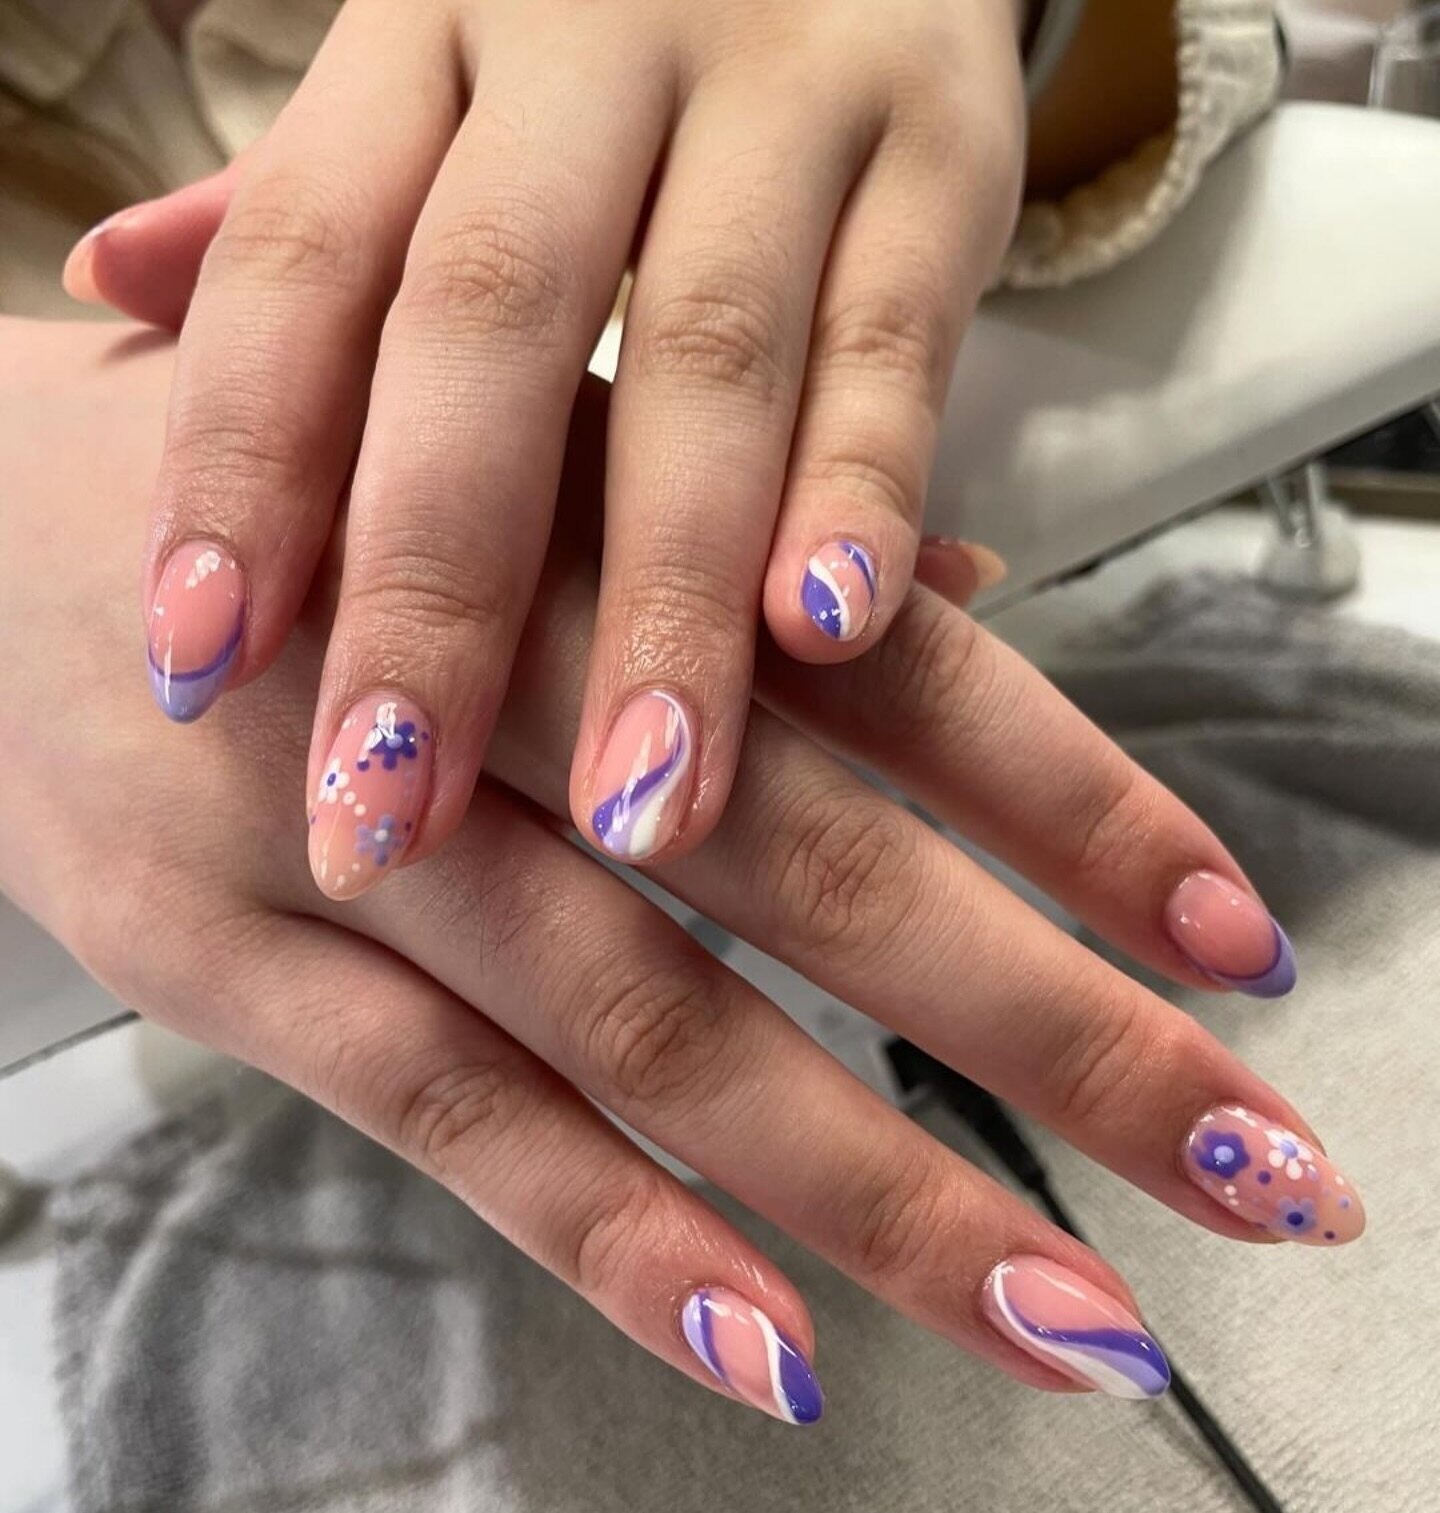 #Repost @paintbyqian with @use.repost
・・・
Spring time 🌸 💅